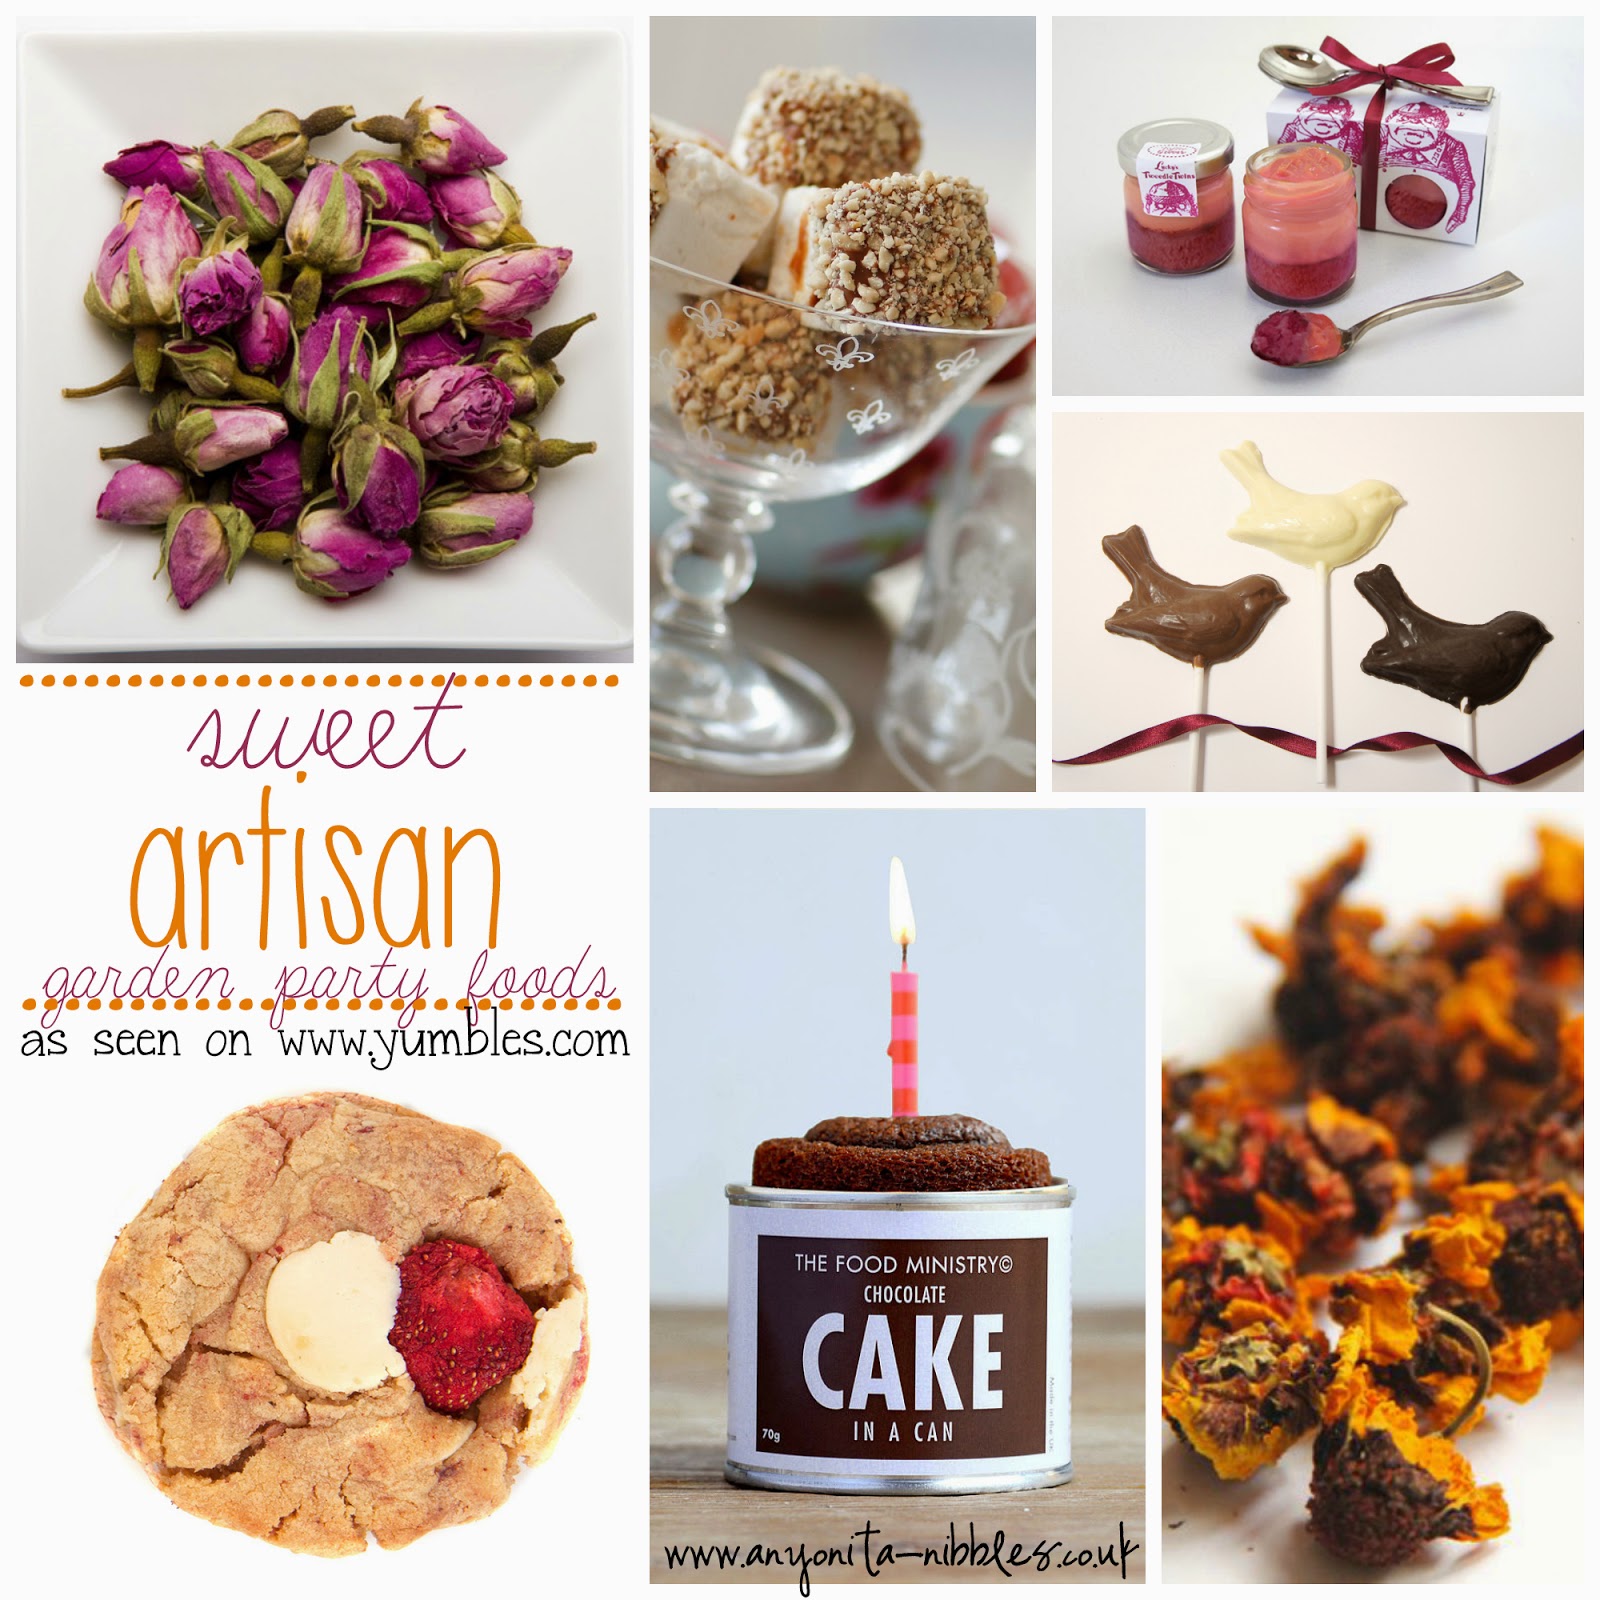 Sweet Artisan Foods for a Late Summer Garden Party by Anyonita Nibbles